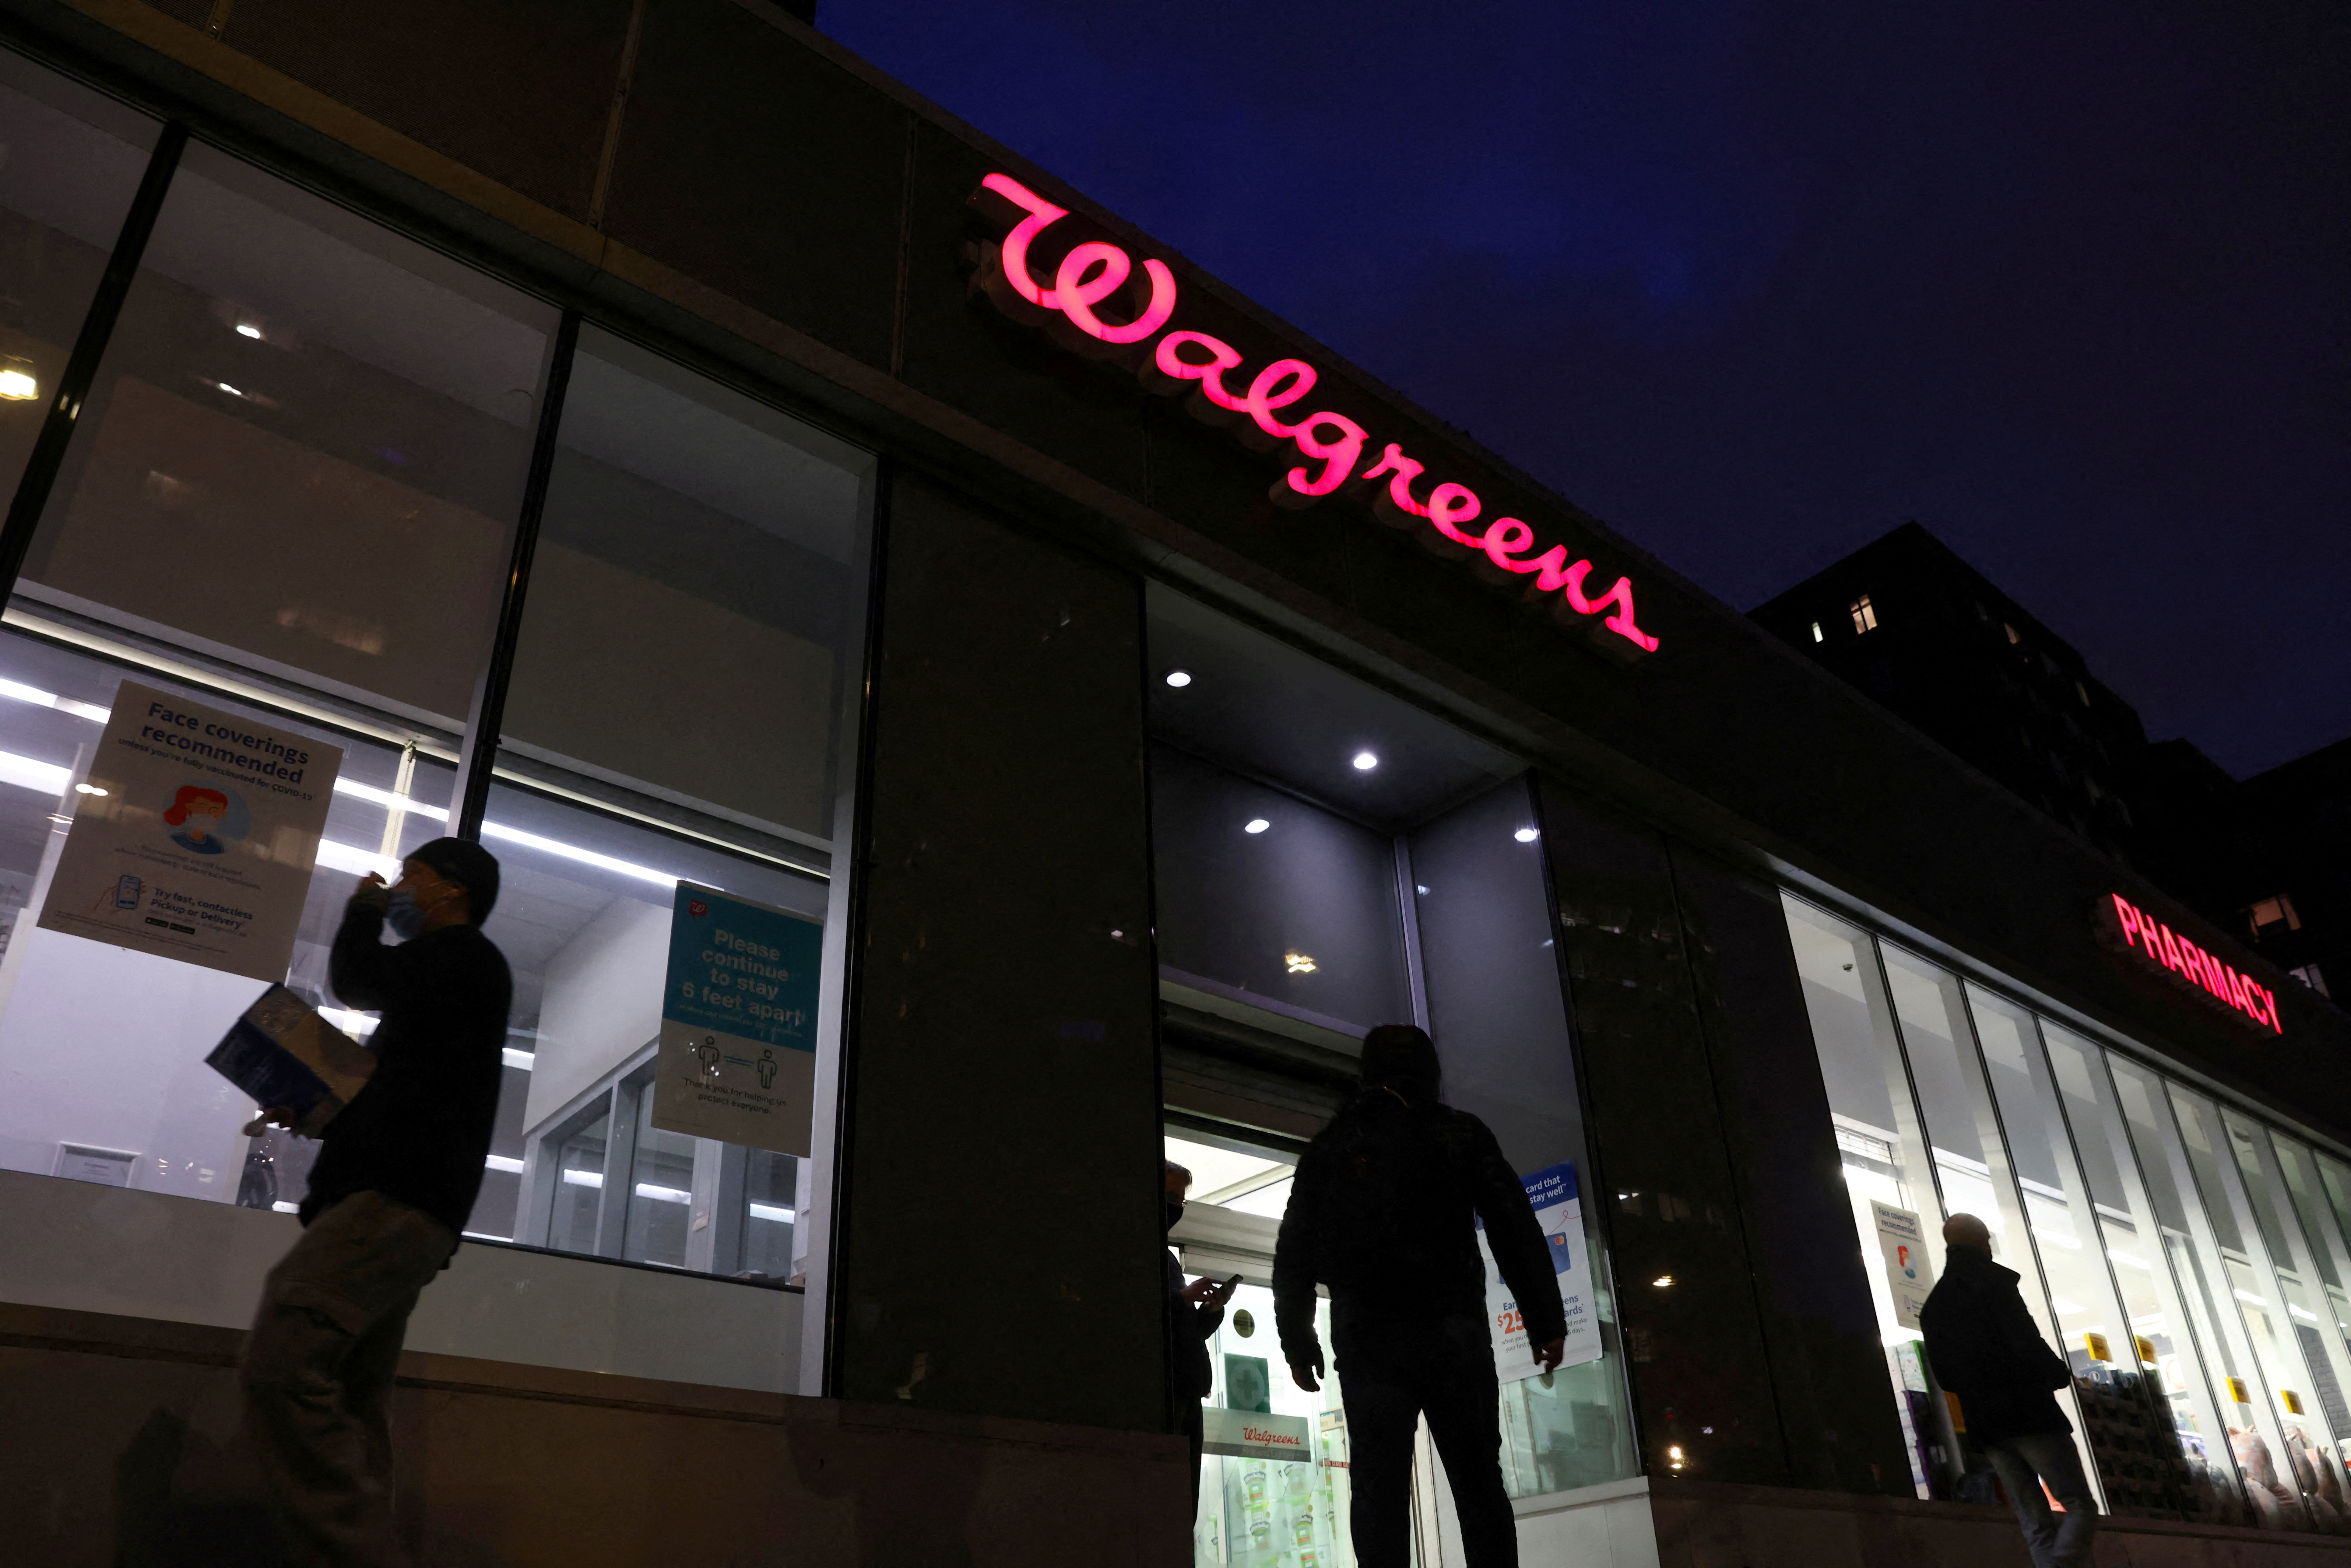 People walk by a Walgreens, owned by the Walgreens Boots Alliance, Inc., in Manhattan, New York City, U.S., November 26, 2021. REUTERS/Andrew Kelly